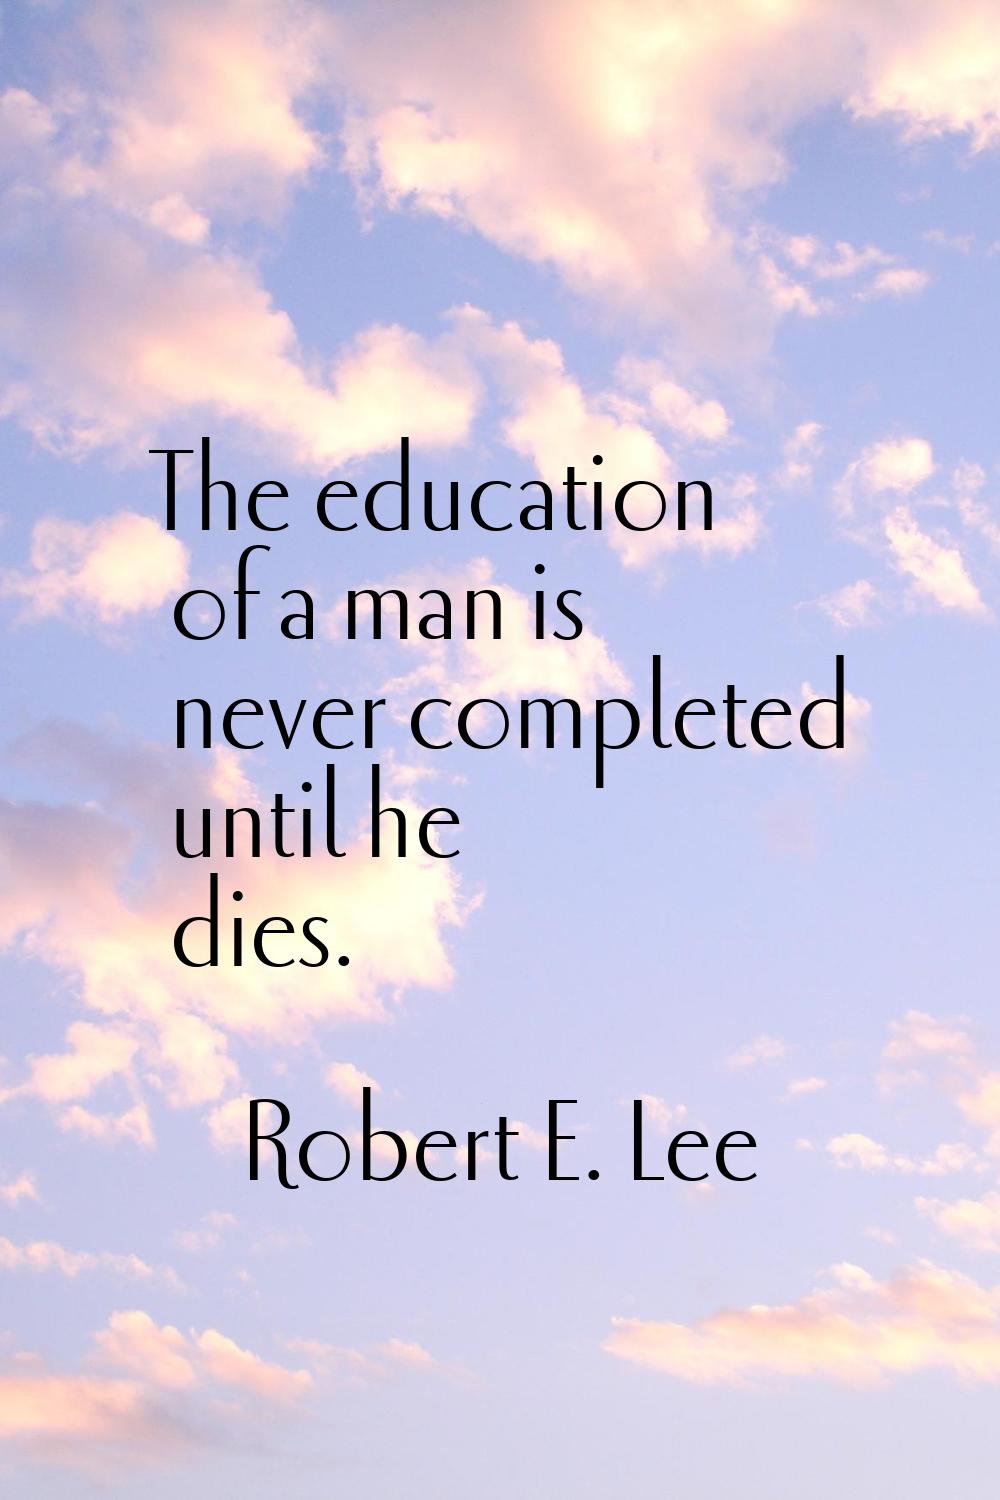 The education of a man is never completed until he dies.